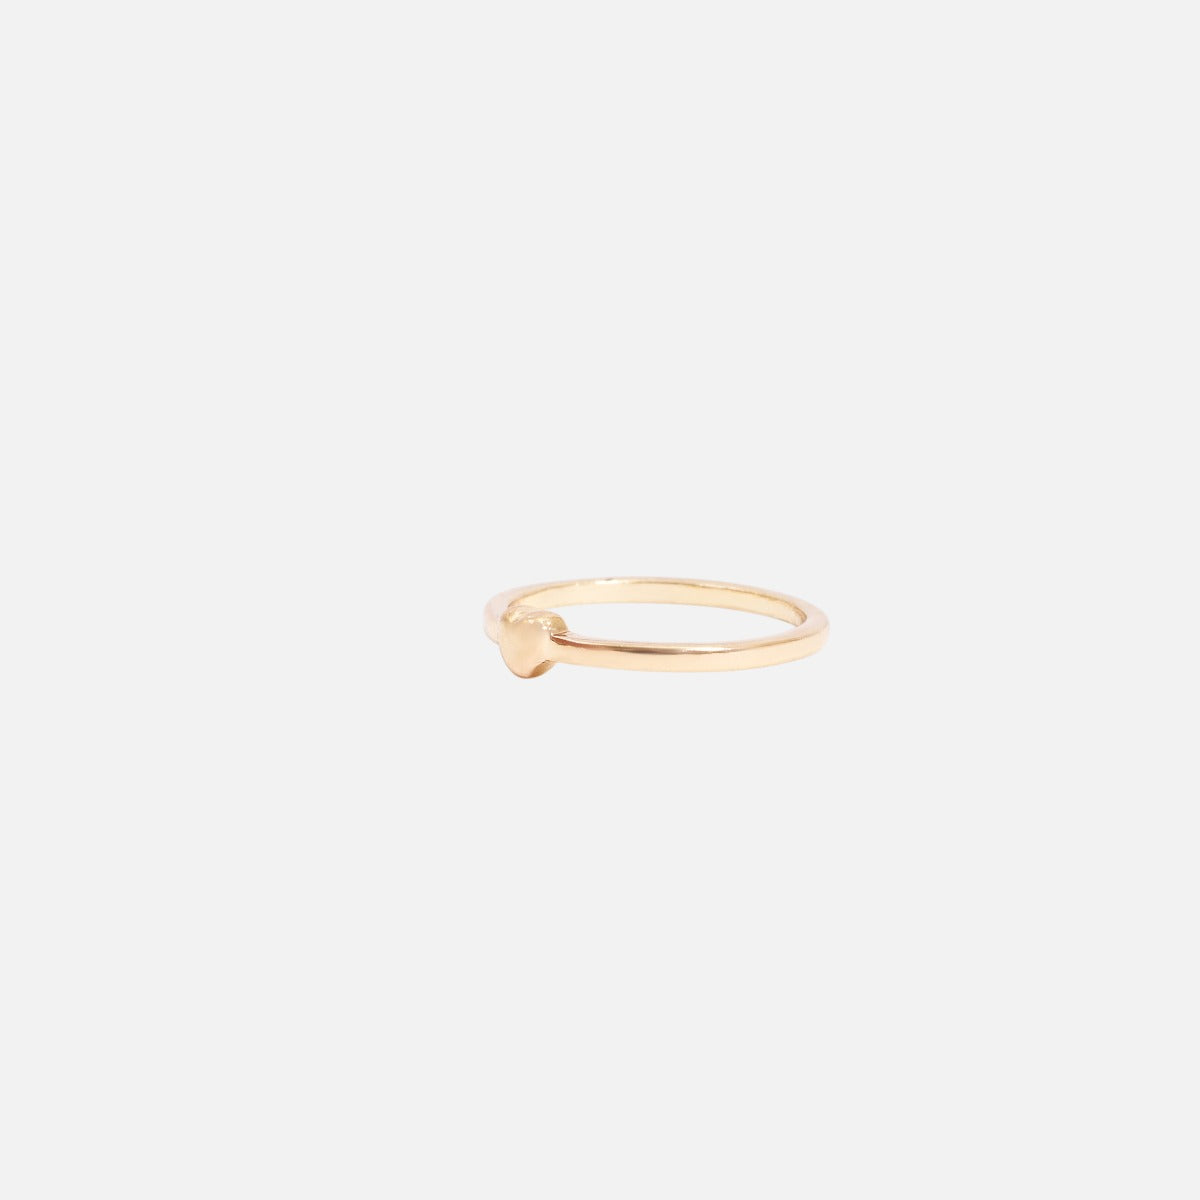 Set of five gold rings